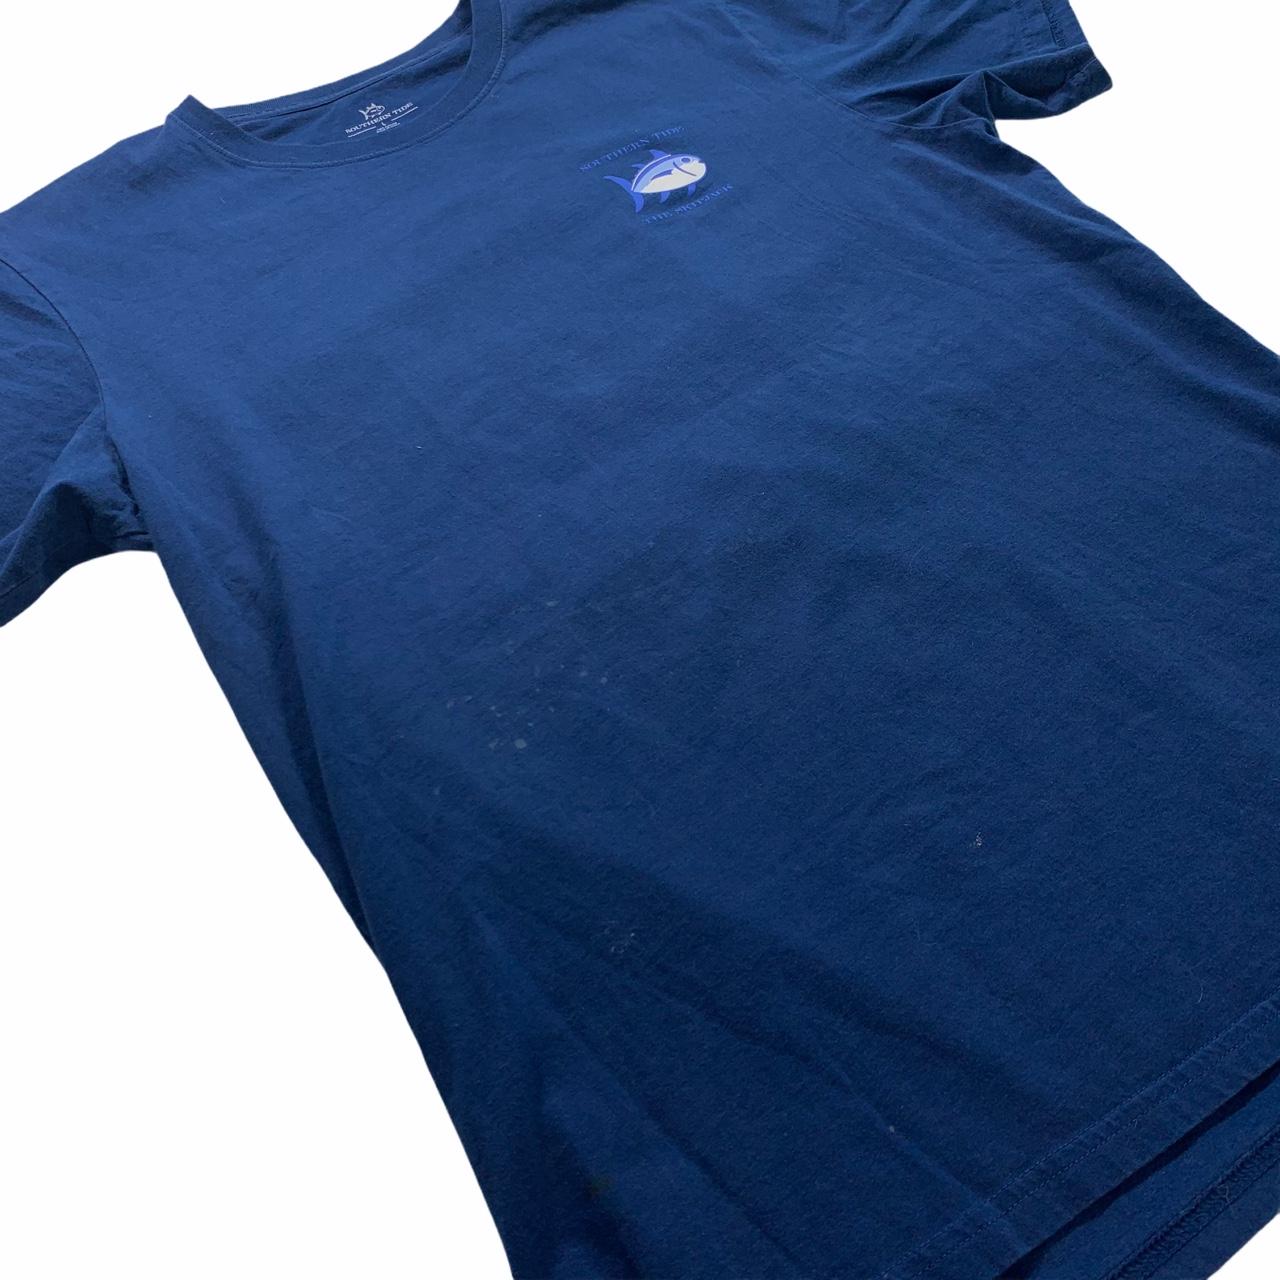 Product Image 3 - •Southern Tide The Skipjack T-Shirt

-Size: